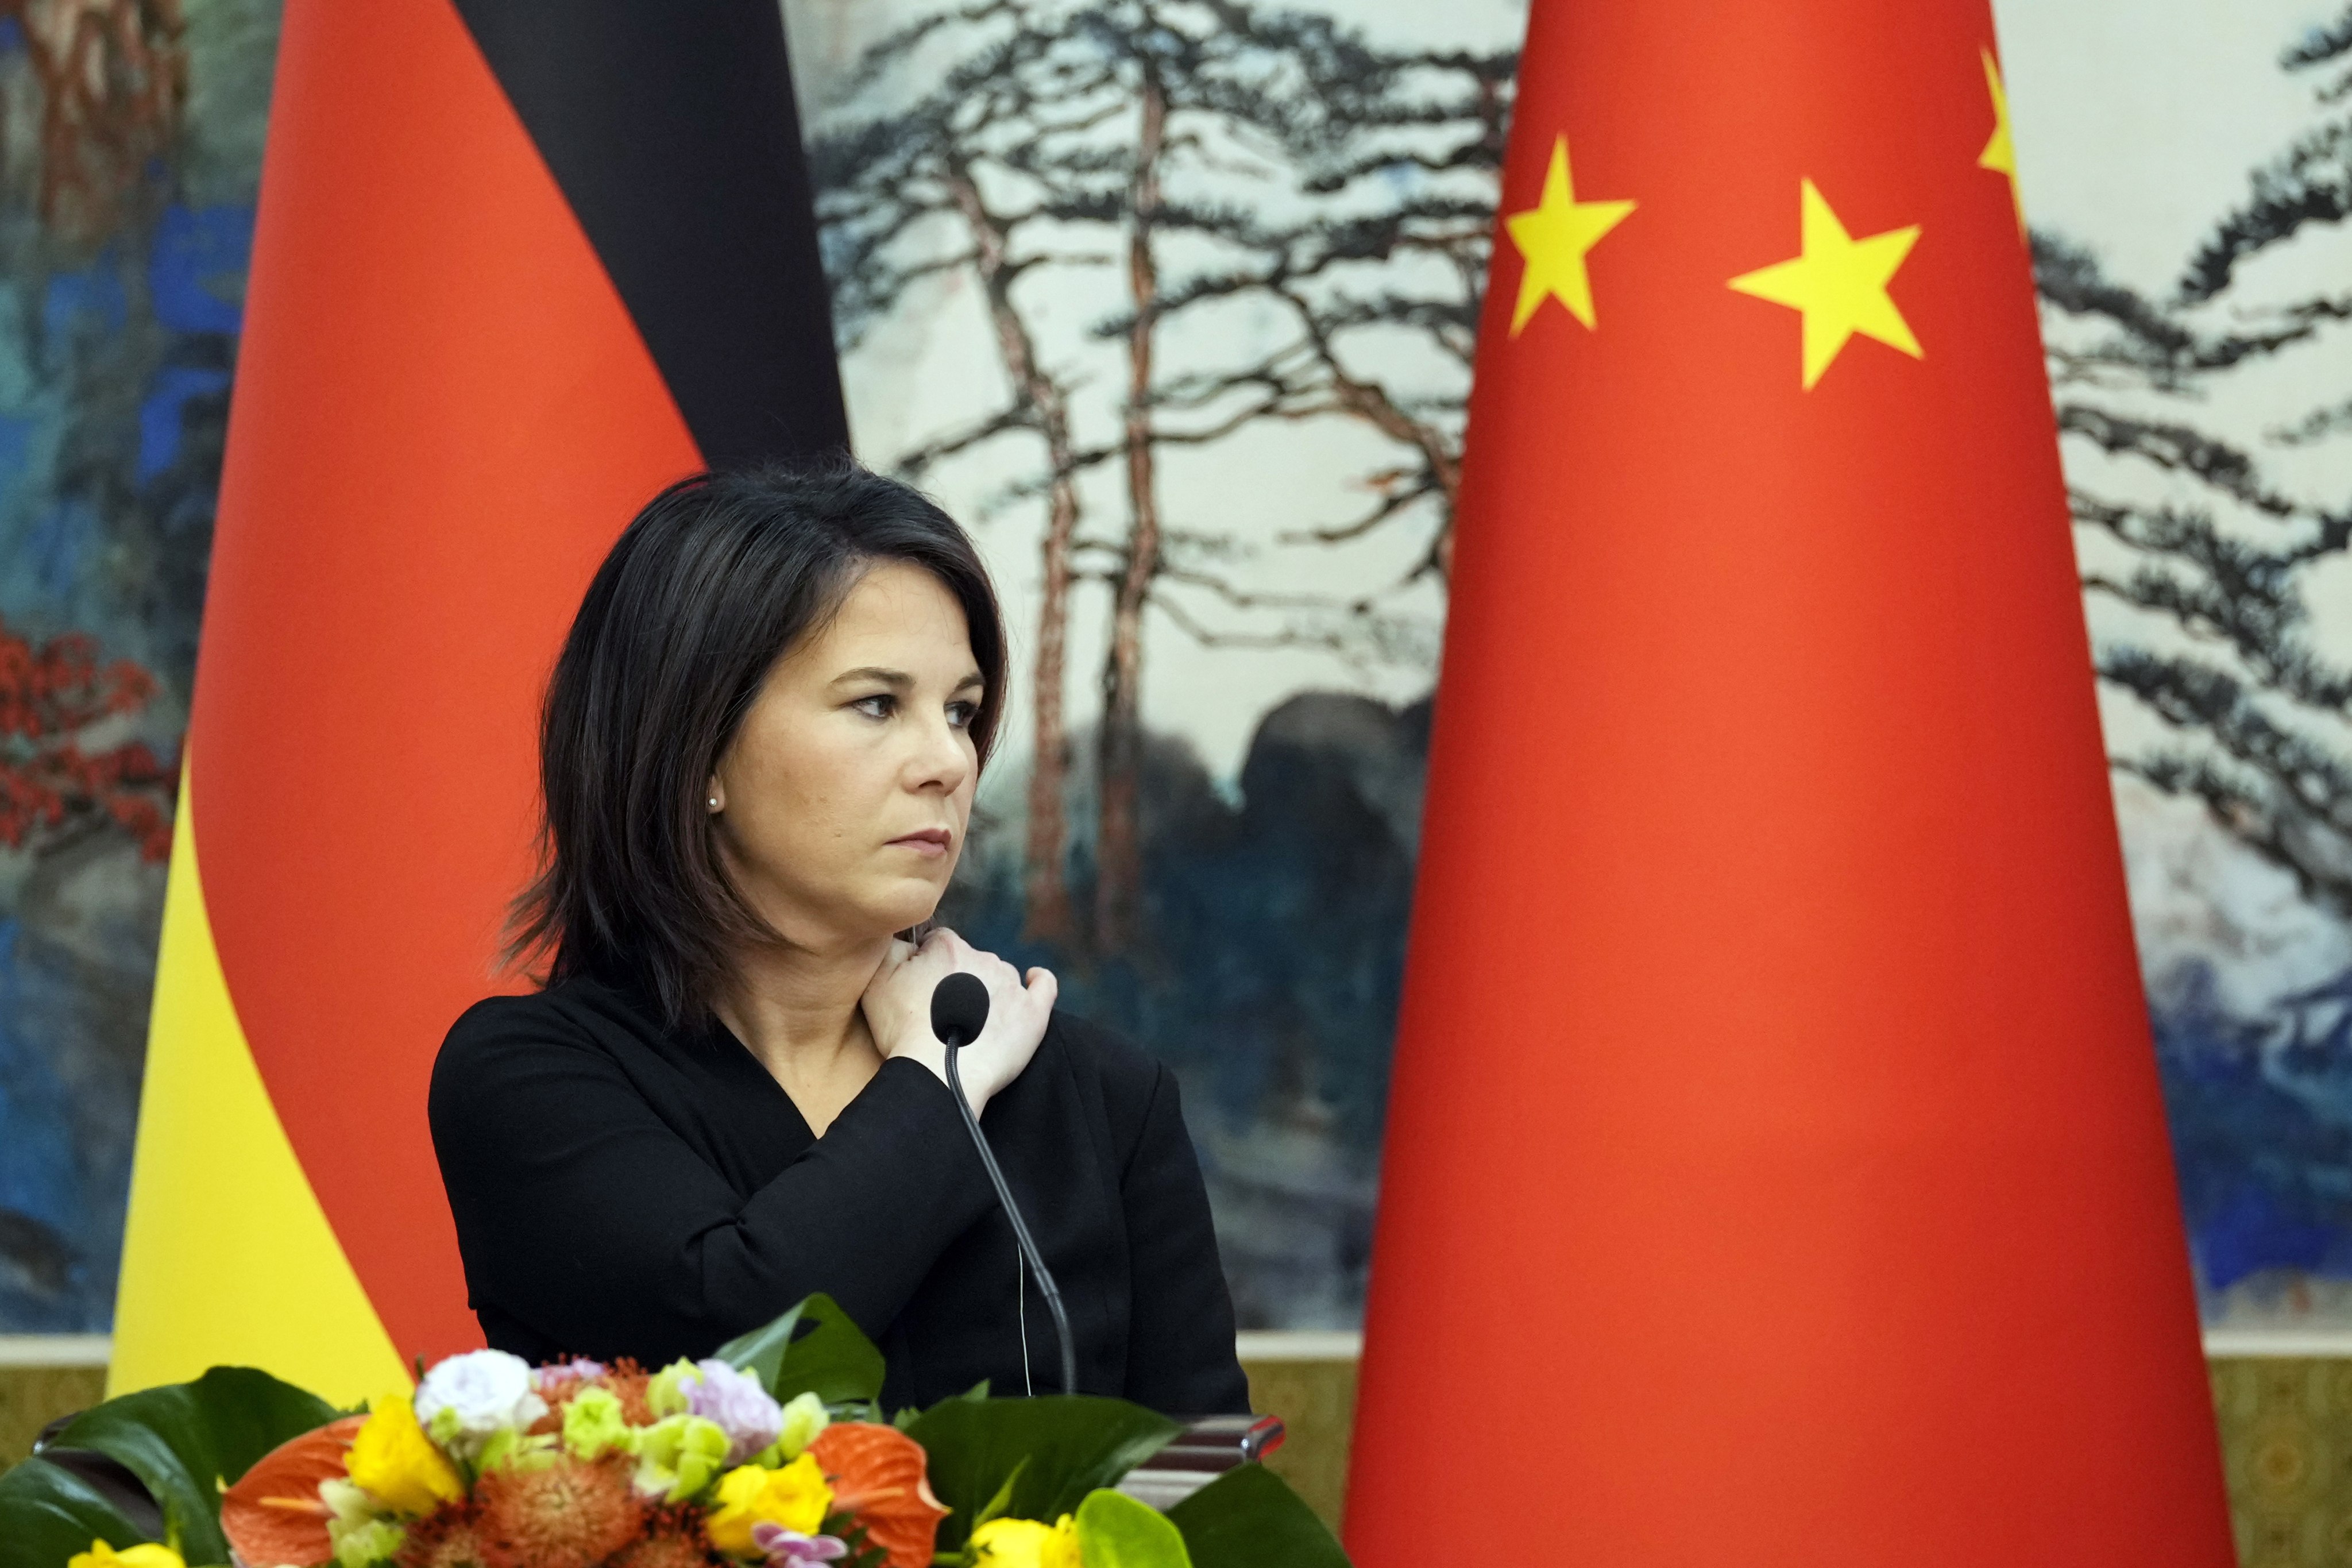 German Foreign Minister Annalena Baerbock has made a new approach to China a priority. Photo: EPA-EFE